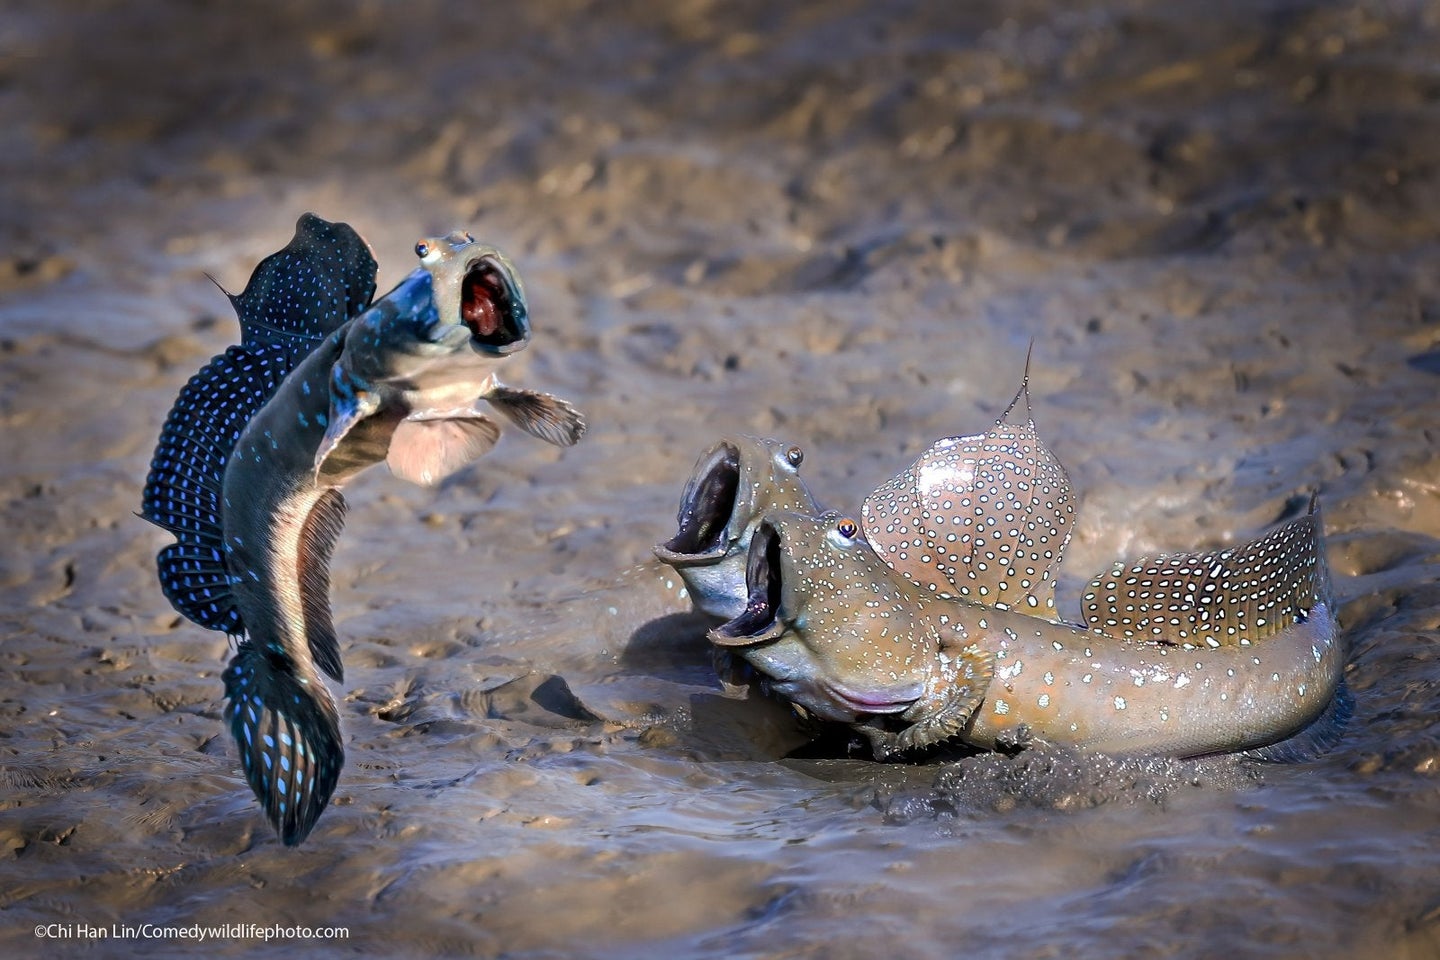 Highly commended winner: Chu Han Lin with their picture "See who jumps high."
Mudskipper, Taiwan.